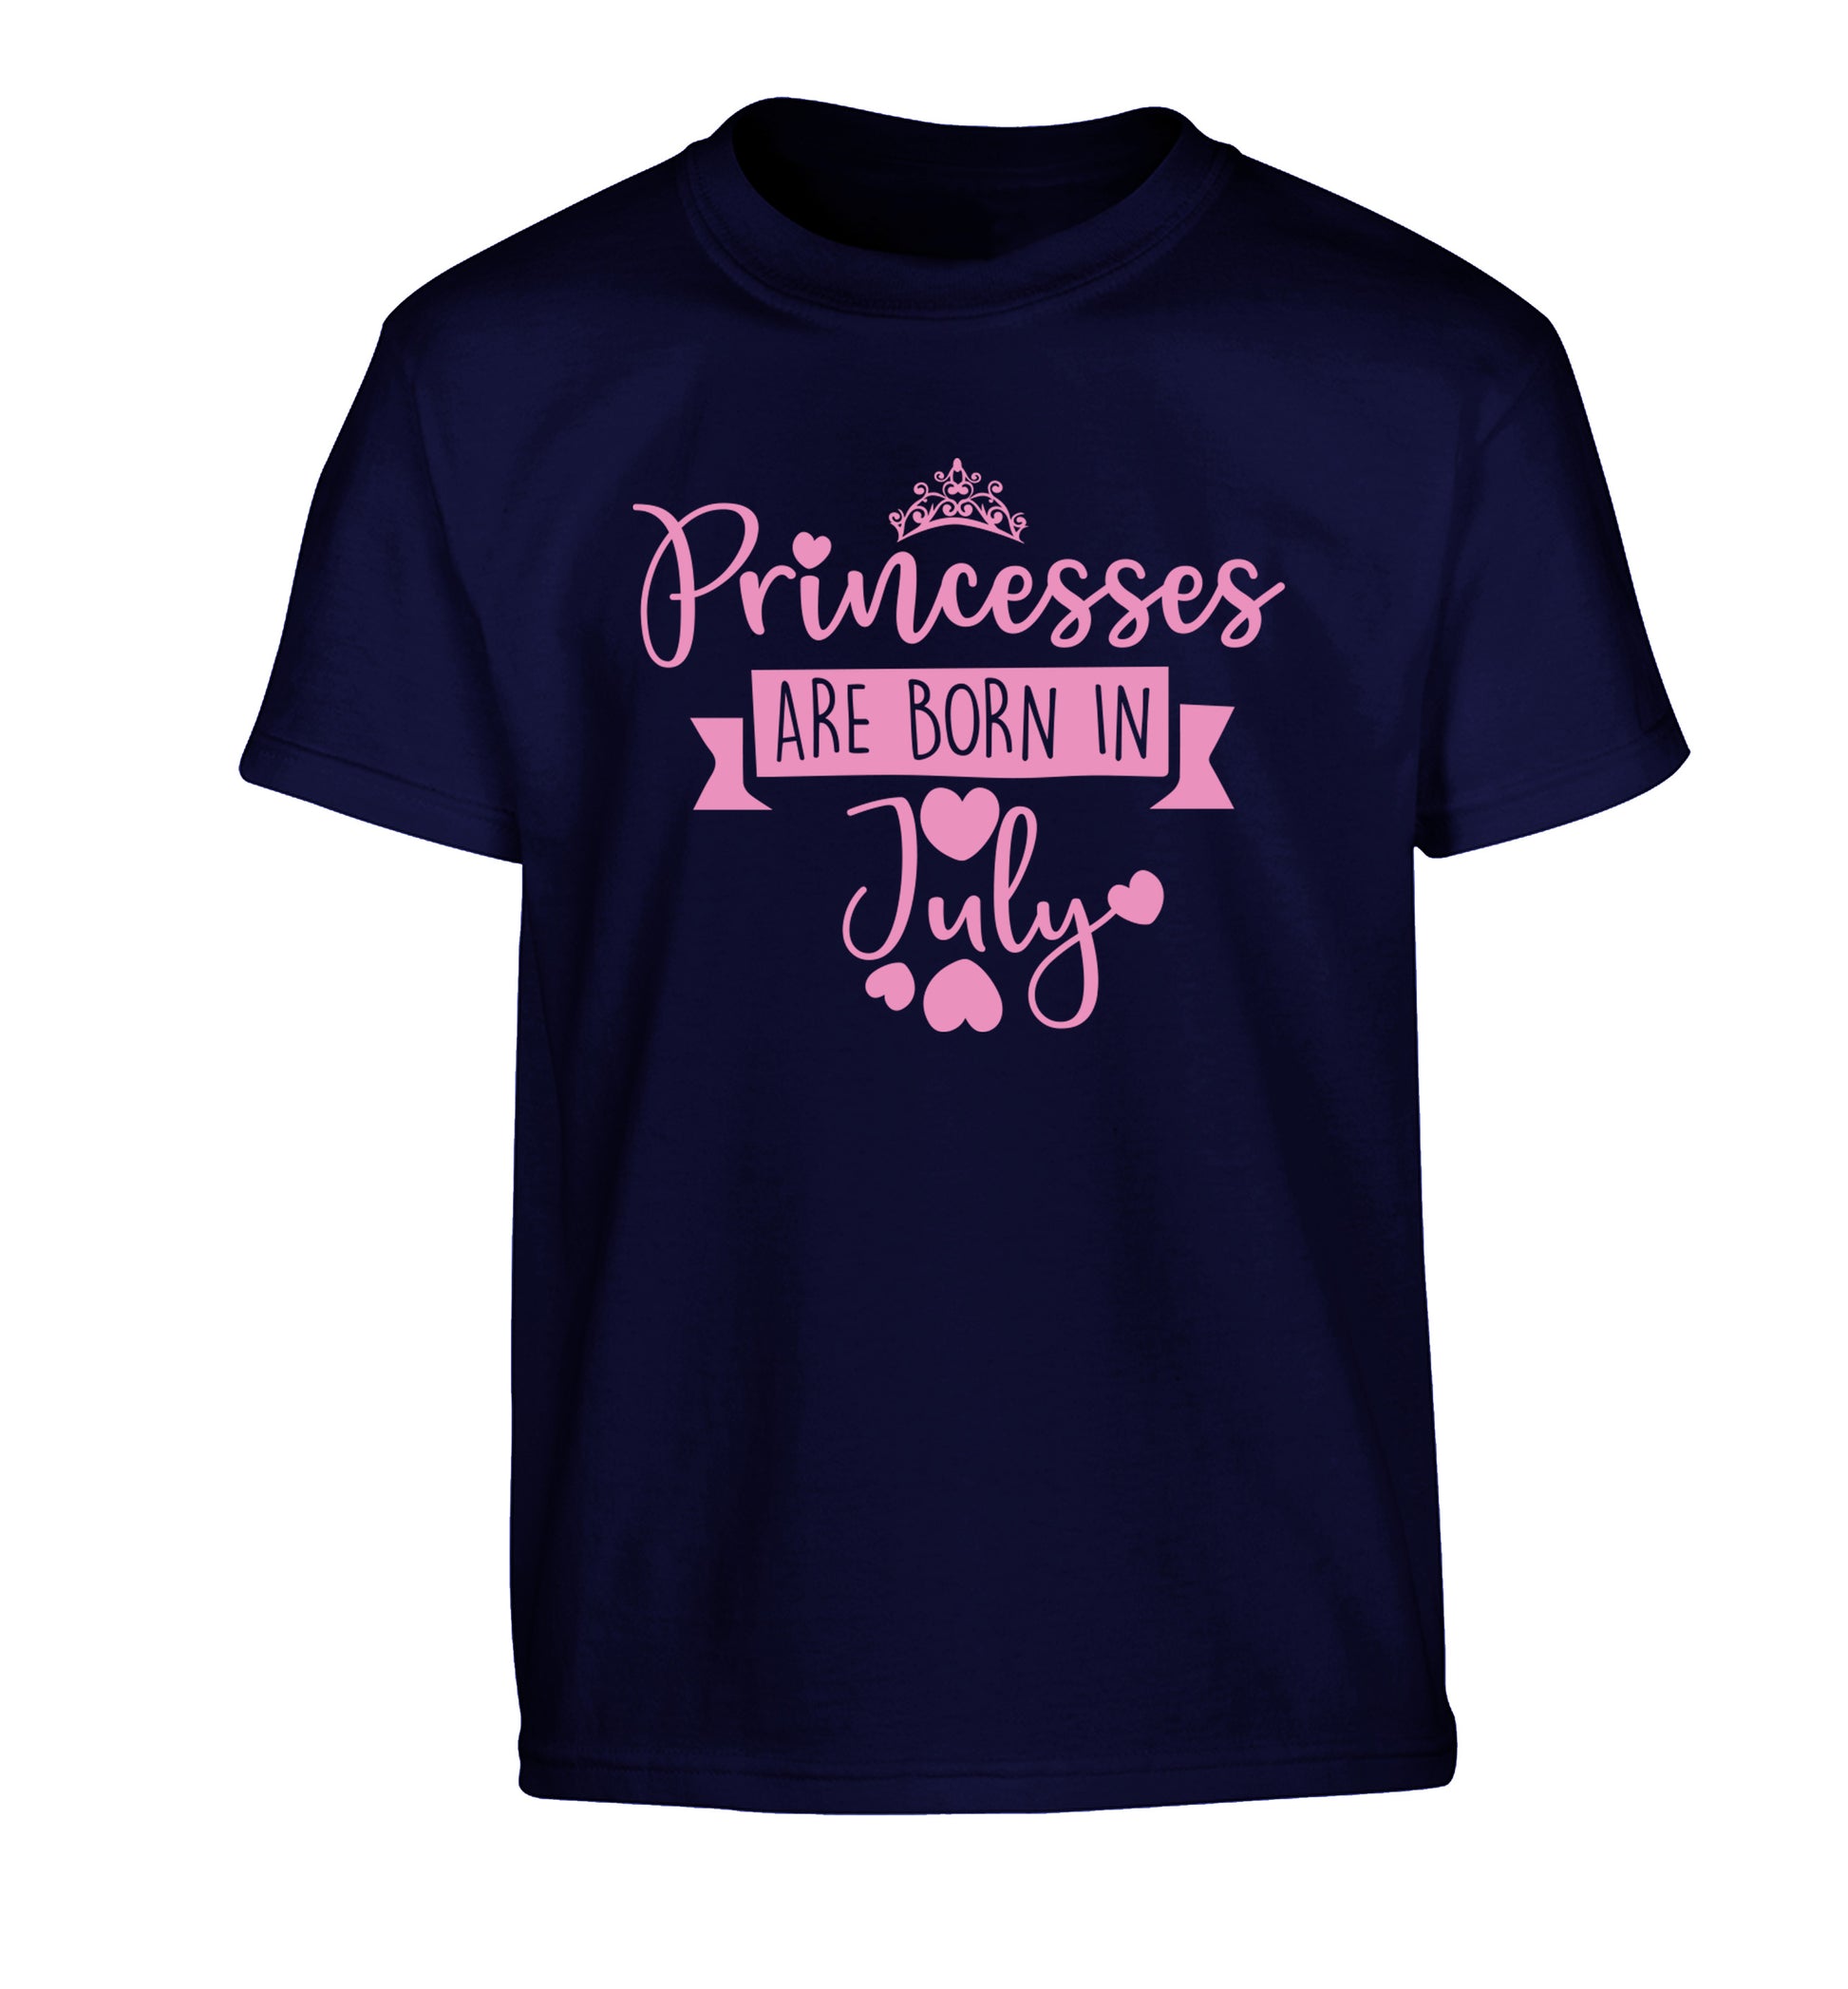 Princesses are born in July Children's navy Tshirt 12-13 Years